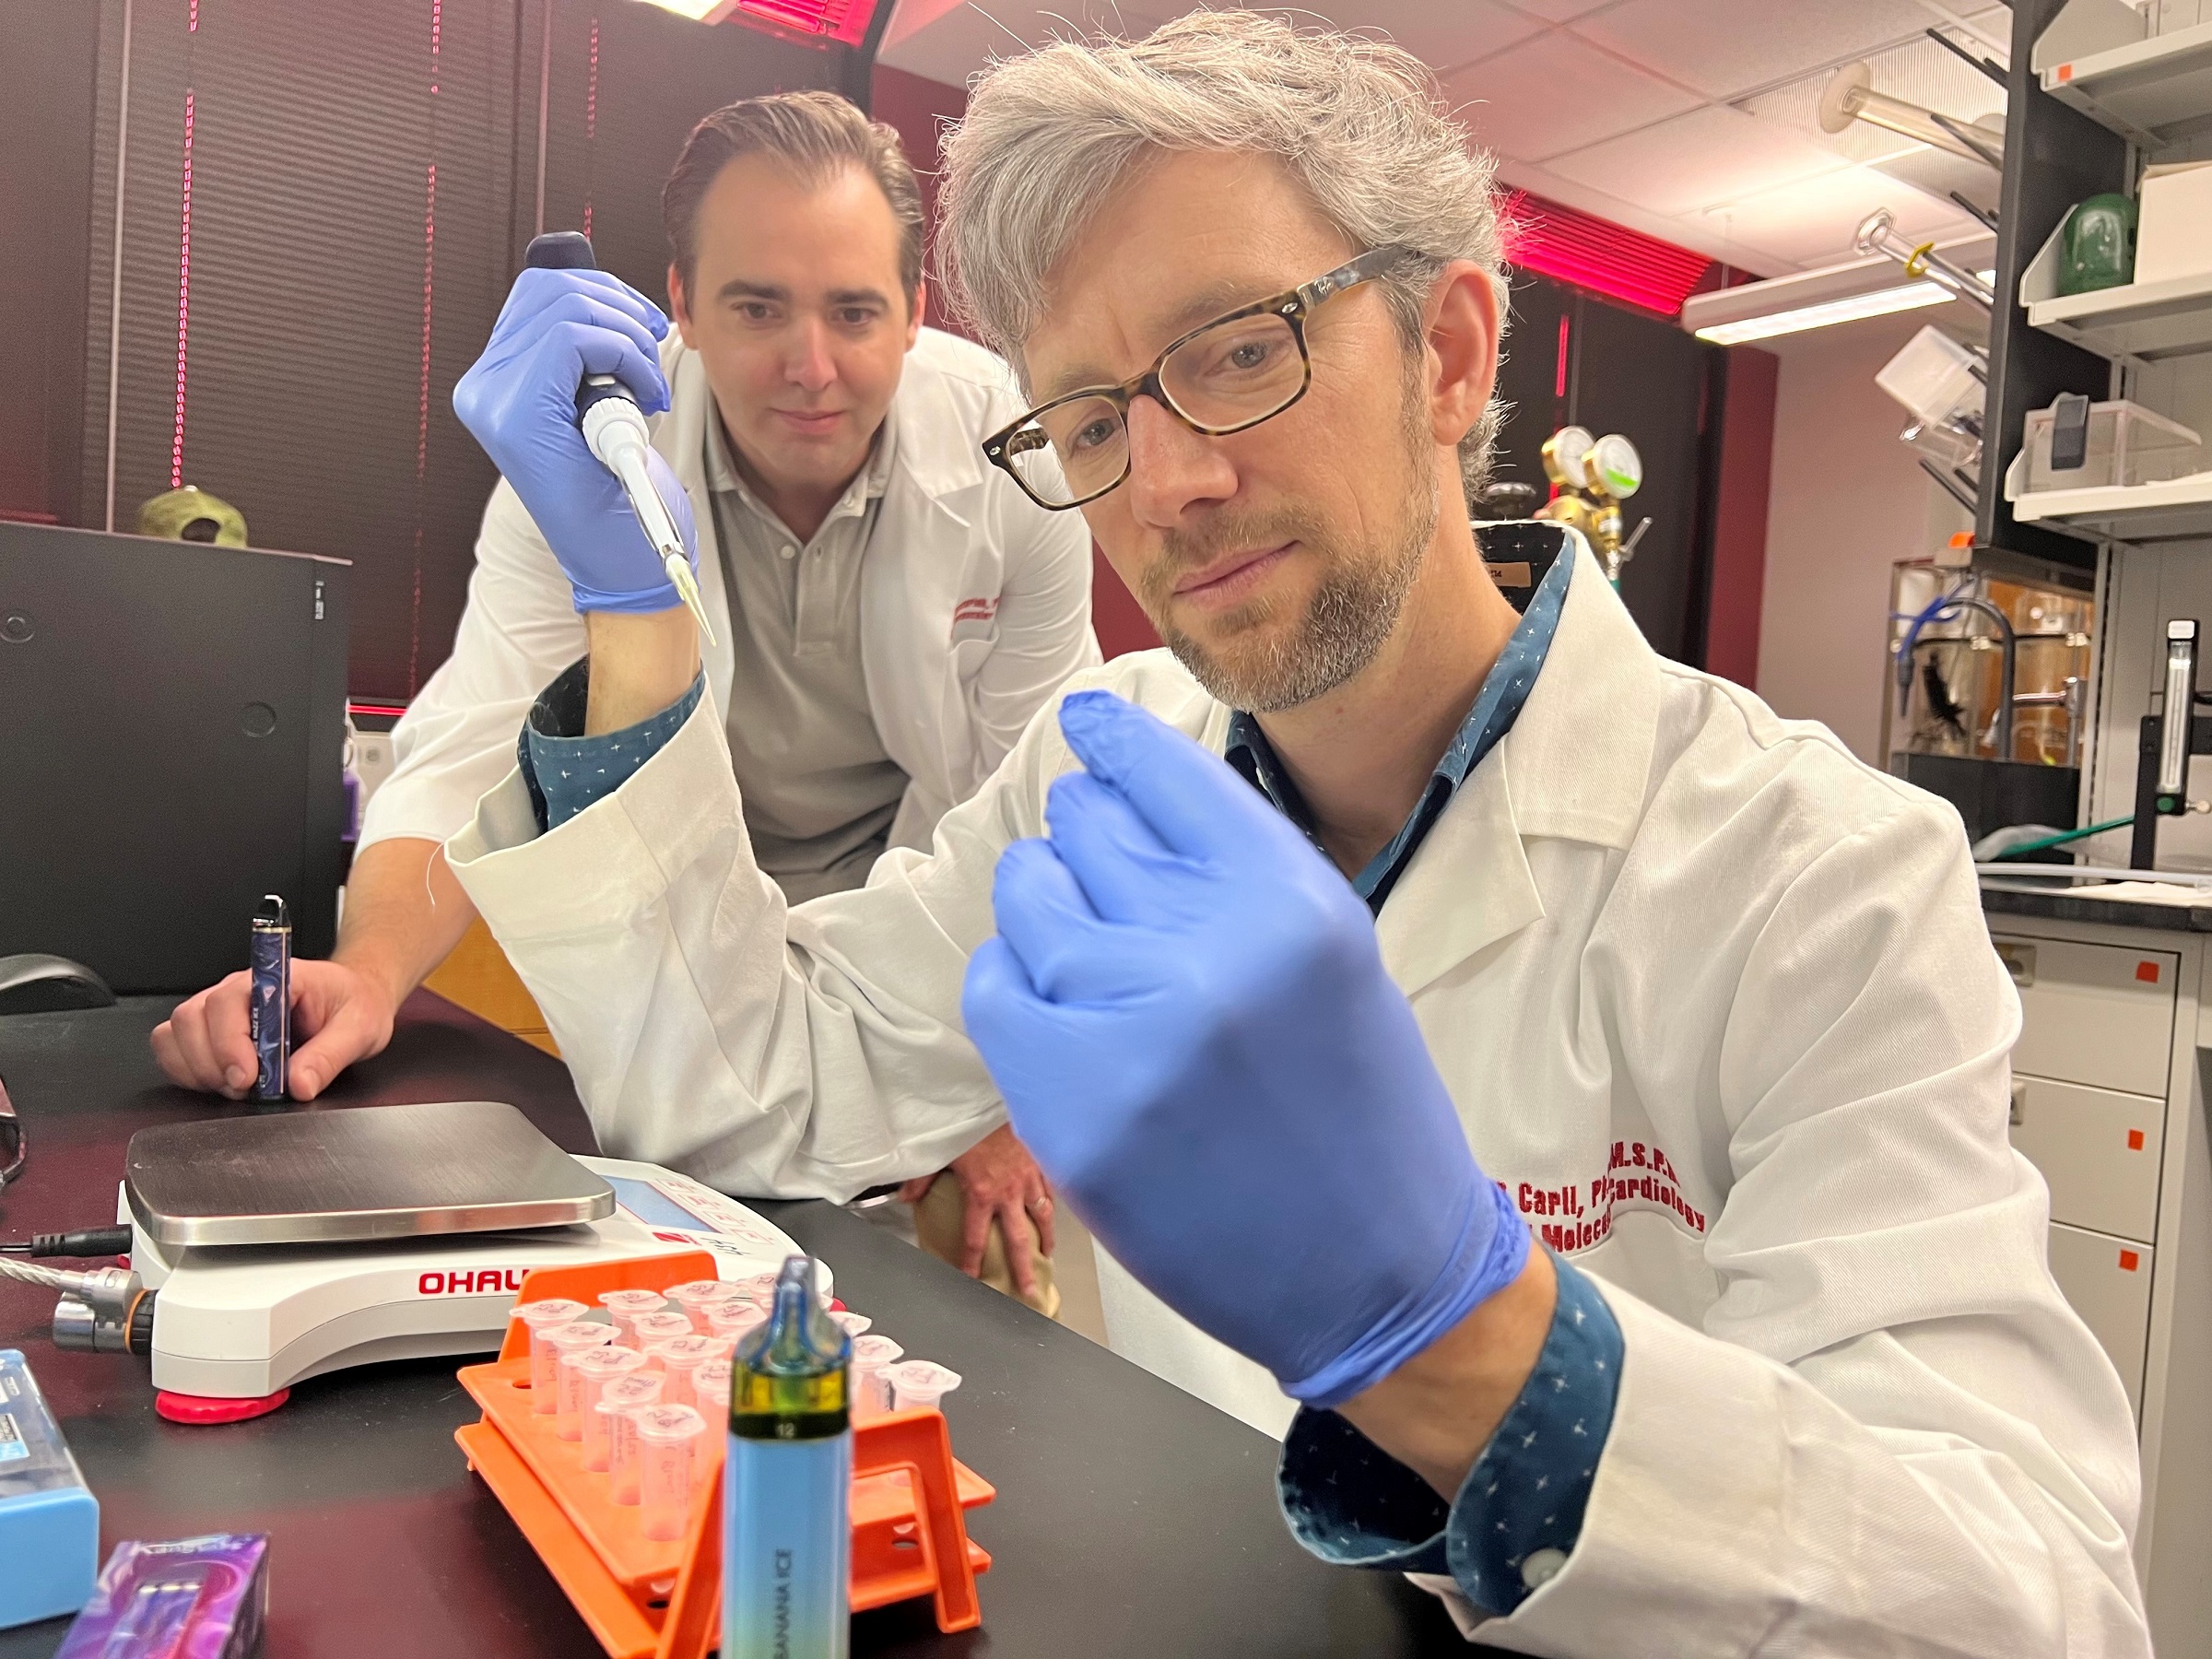 Alex Carll, assistant professor in the UofL Department of Physiology, front, with Matthew Nystoriak, associate professor of medicine